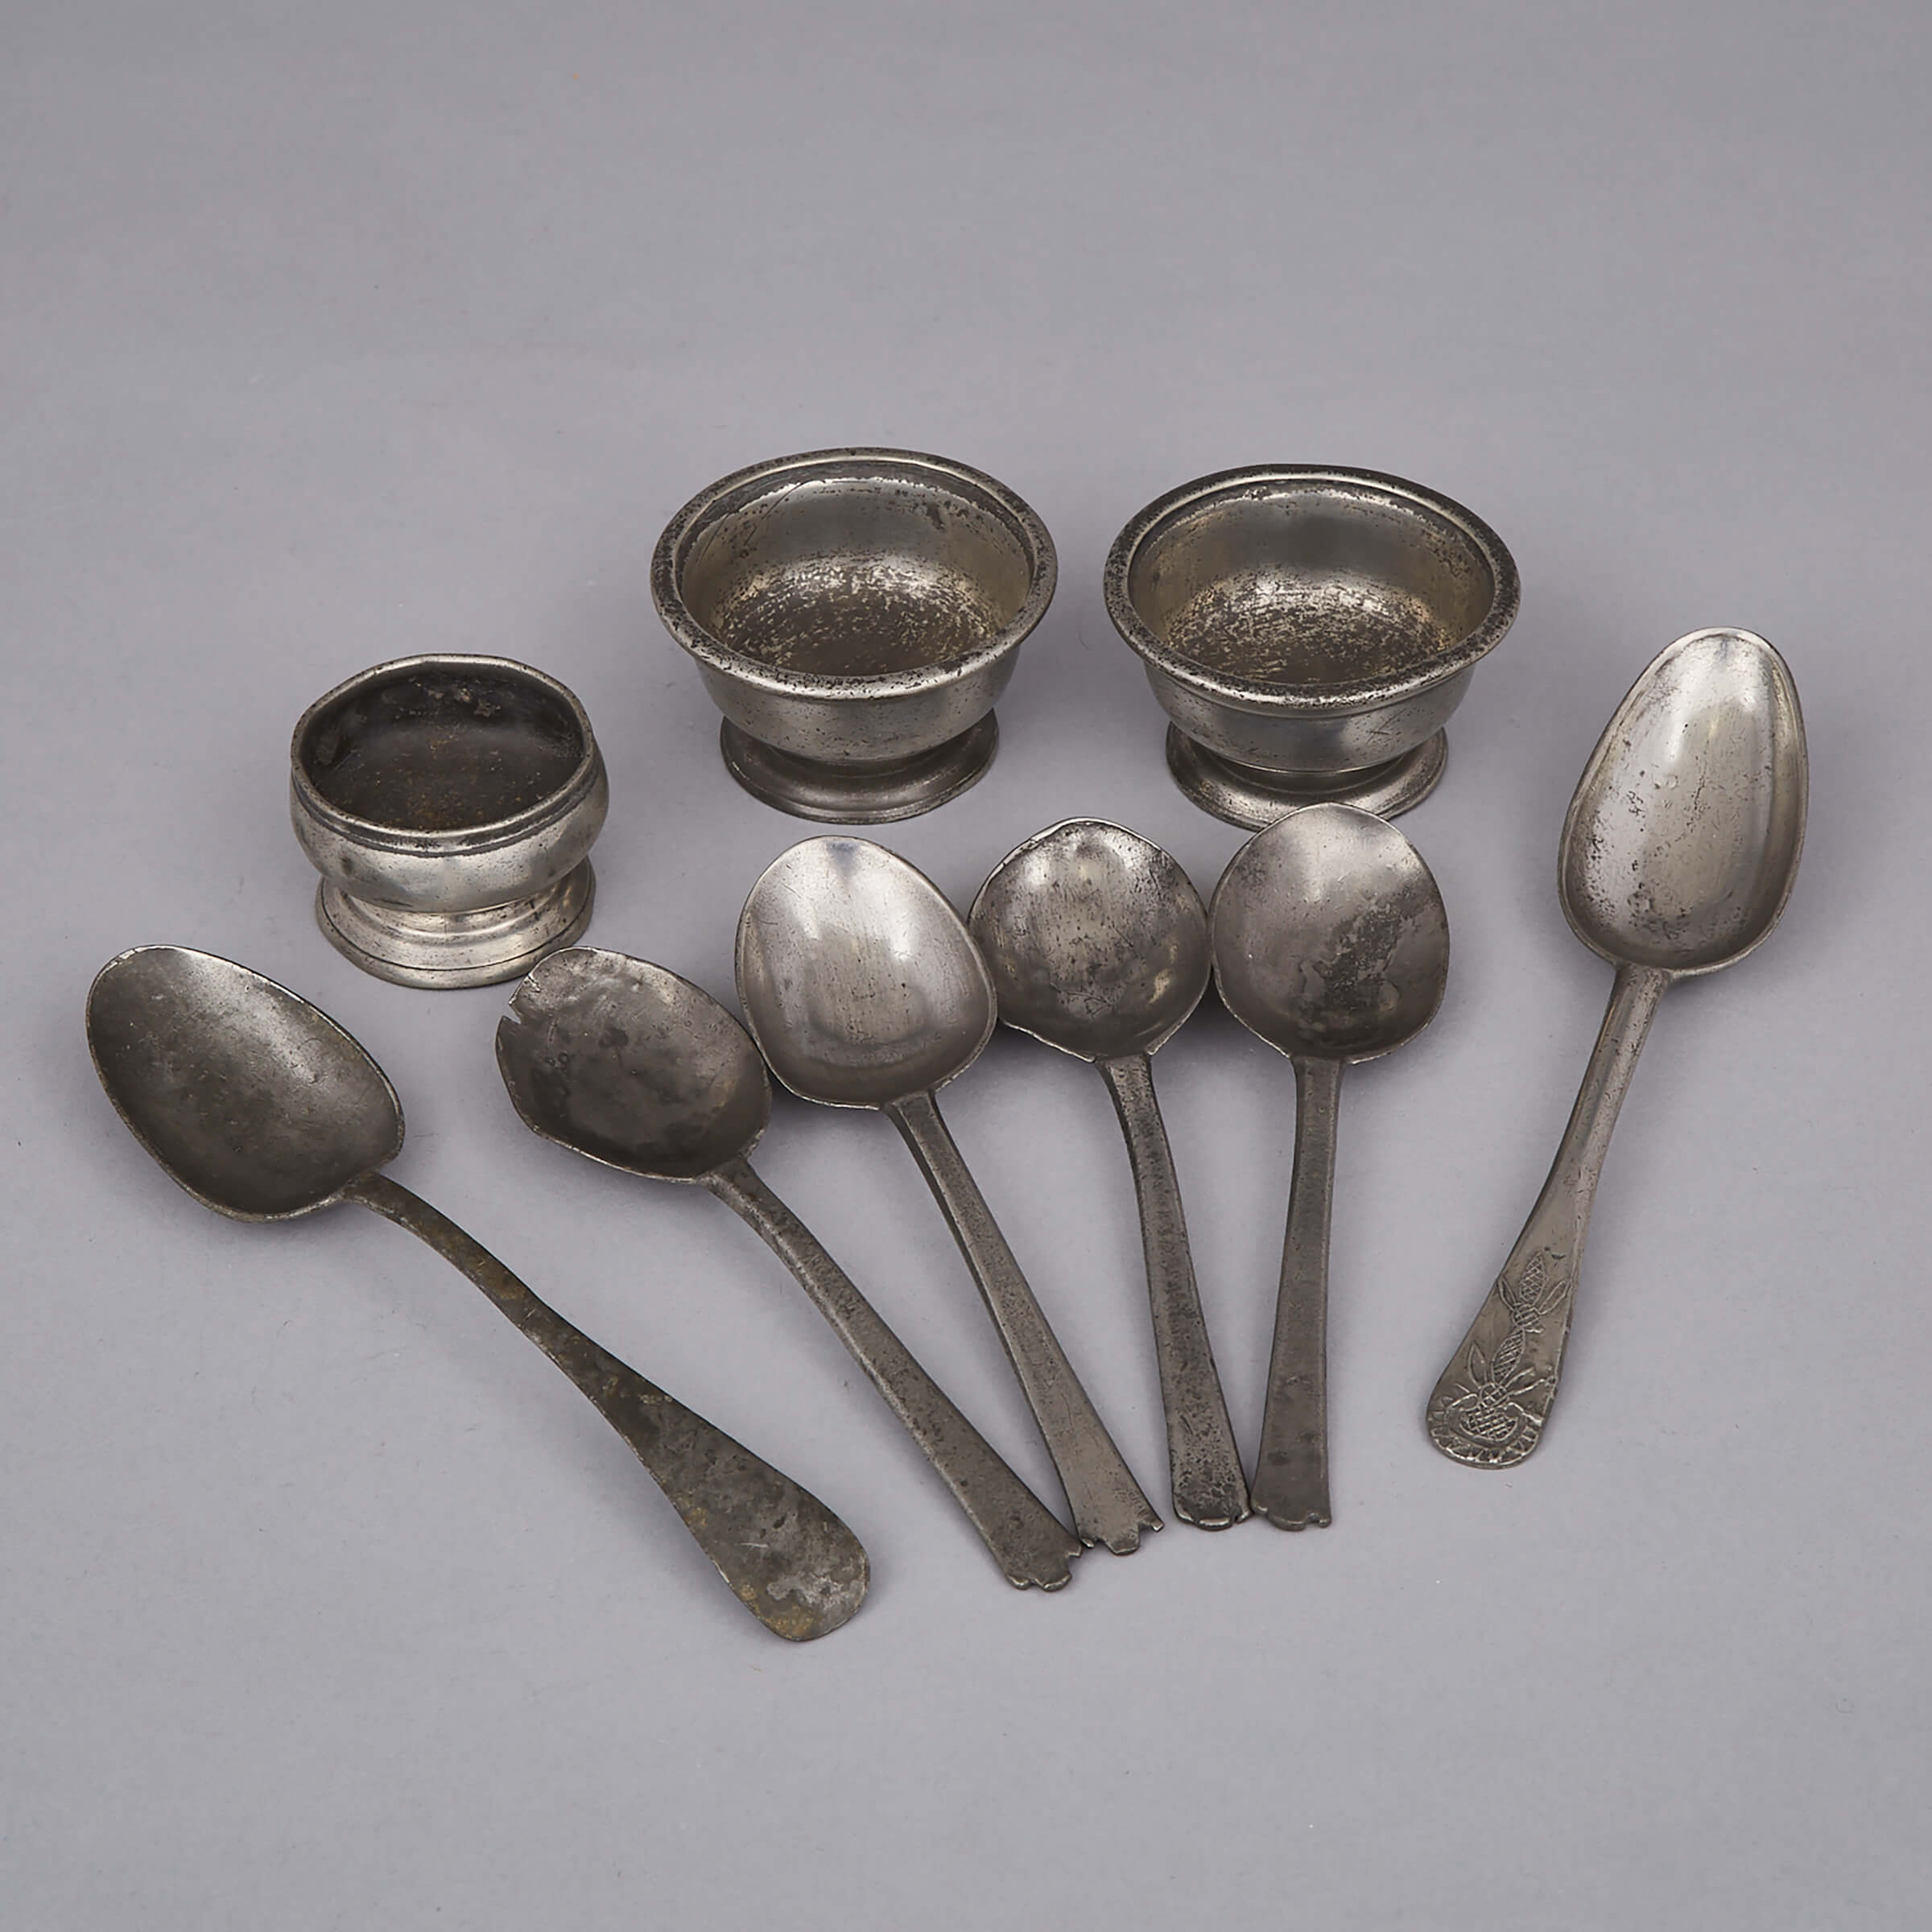 Colection of  Pewter Spoons and Open Salts, 18th/19th century